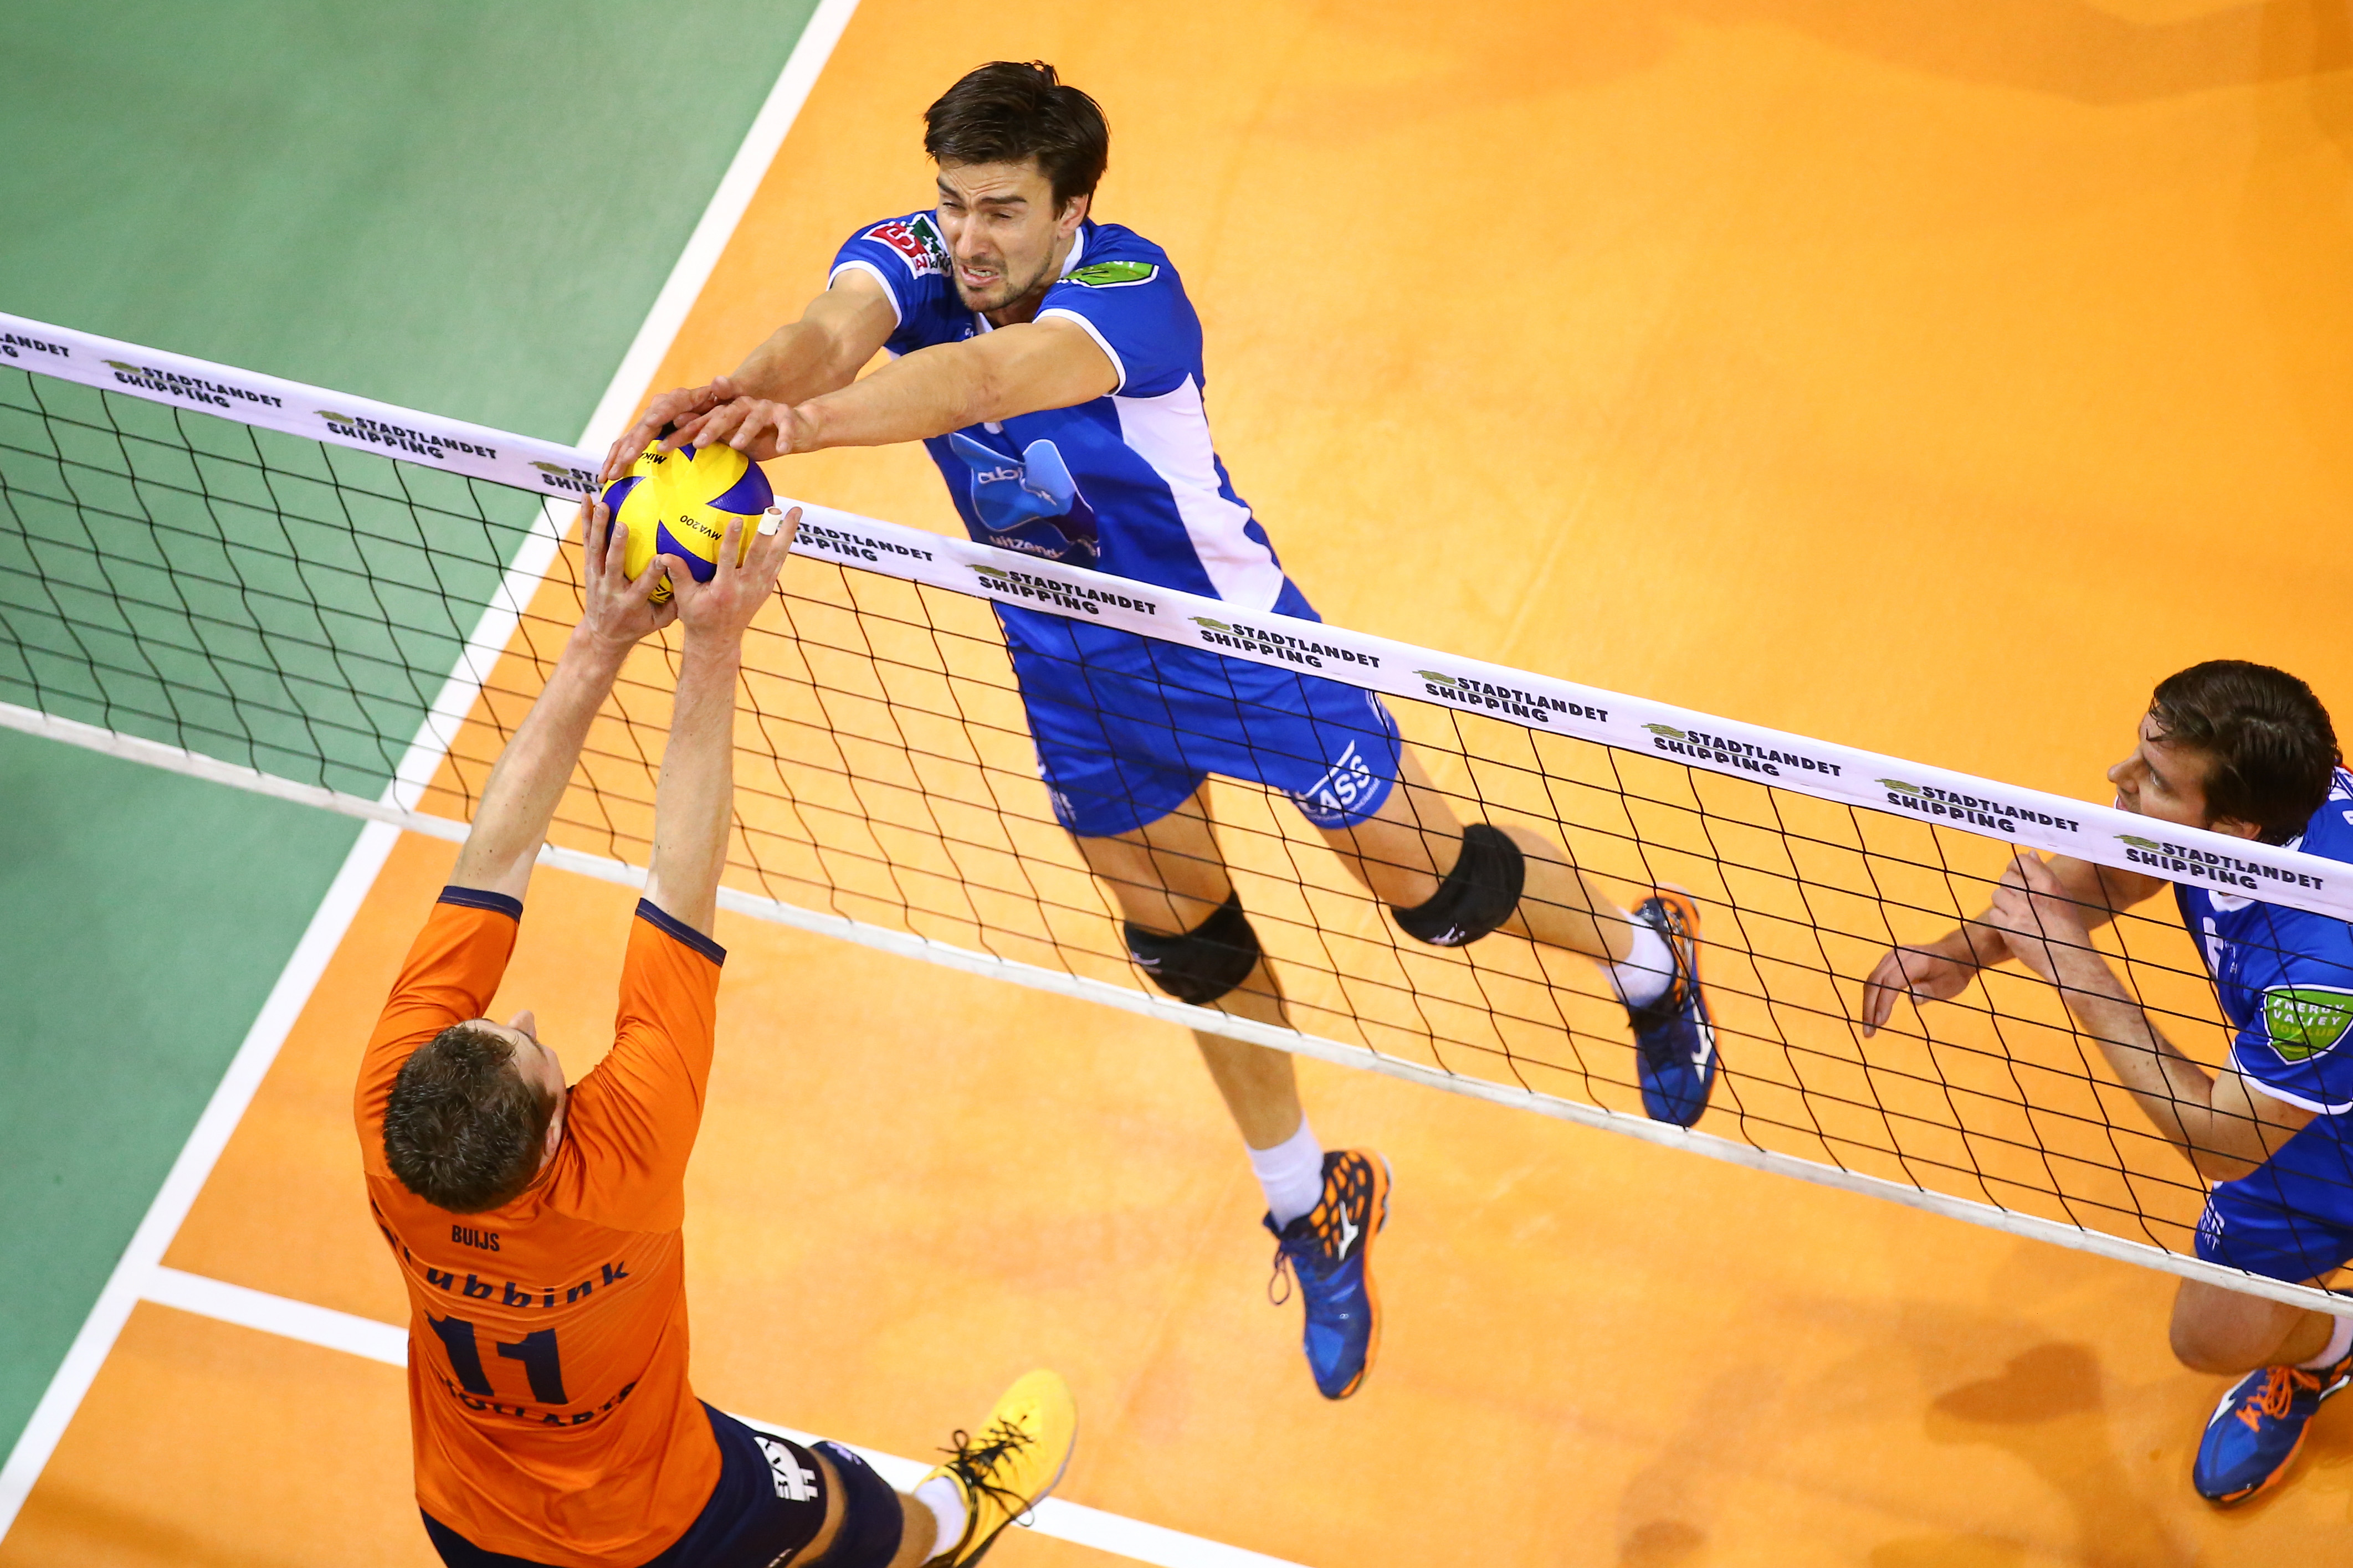 Albany wat betreft Banzai Facts & Figures over Volleybal